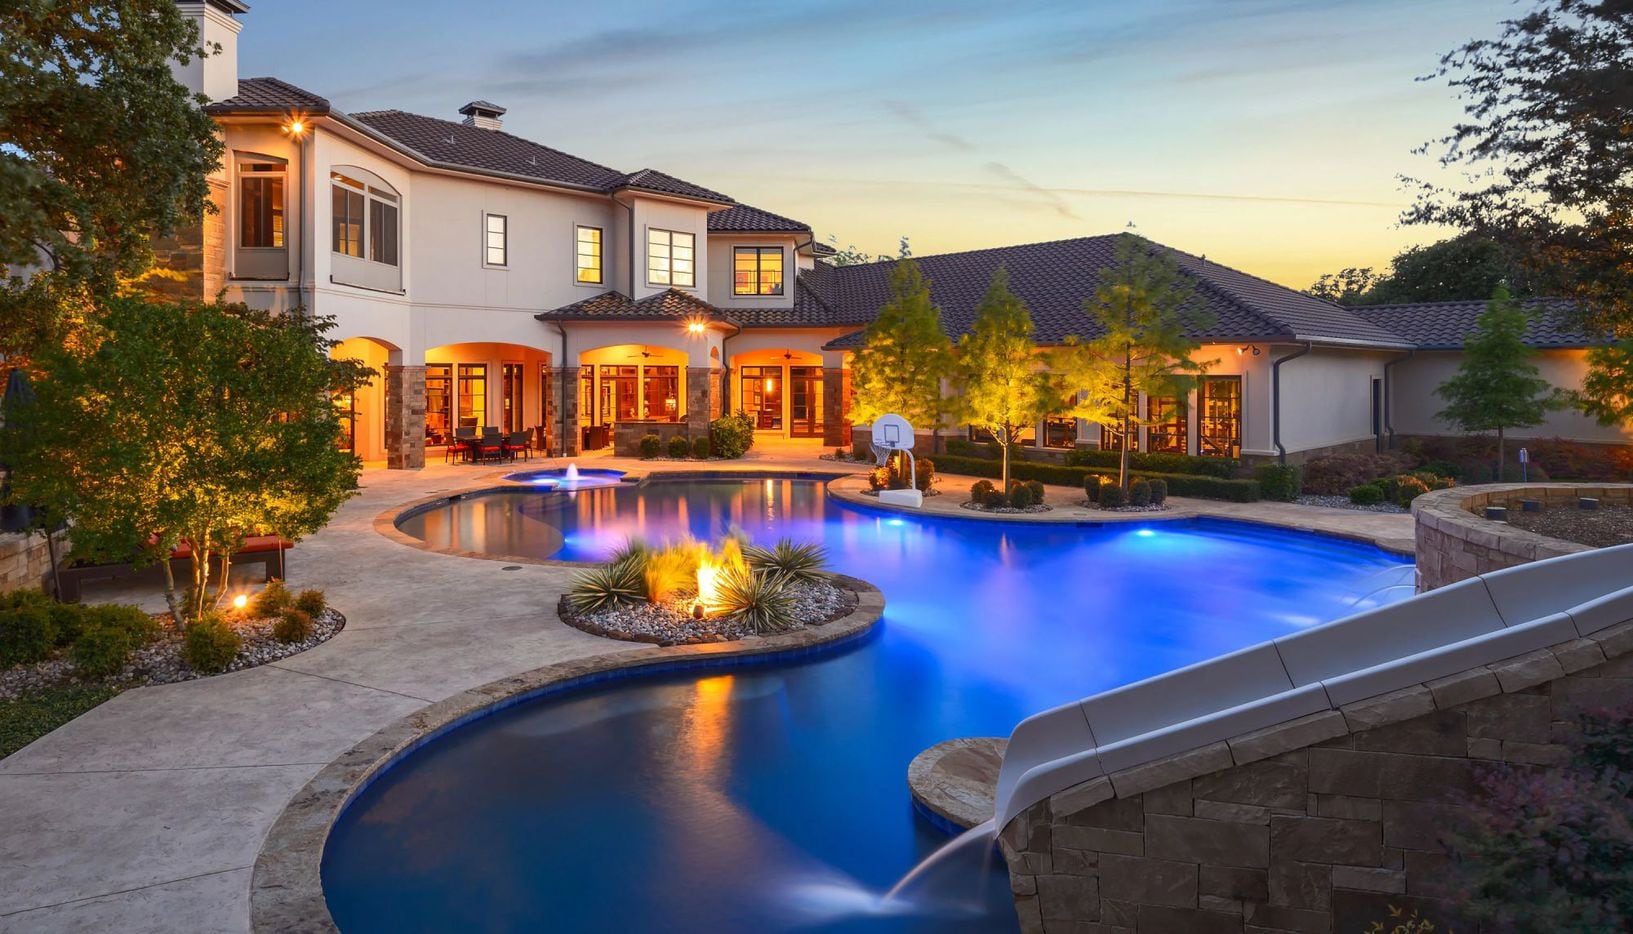 The $11.49 million house is in Southlake,